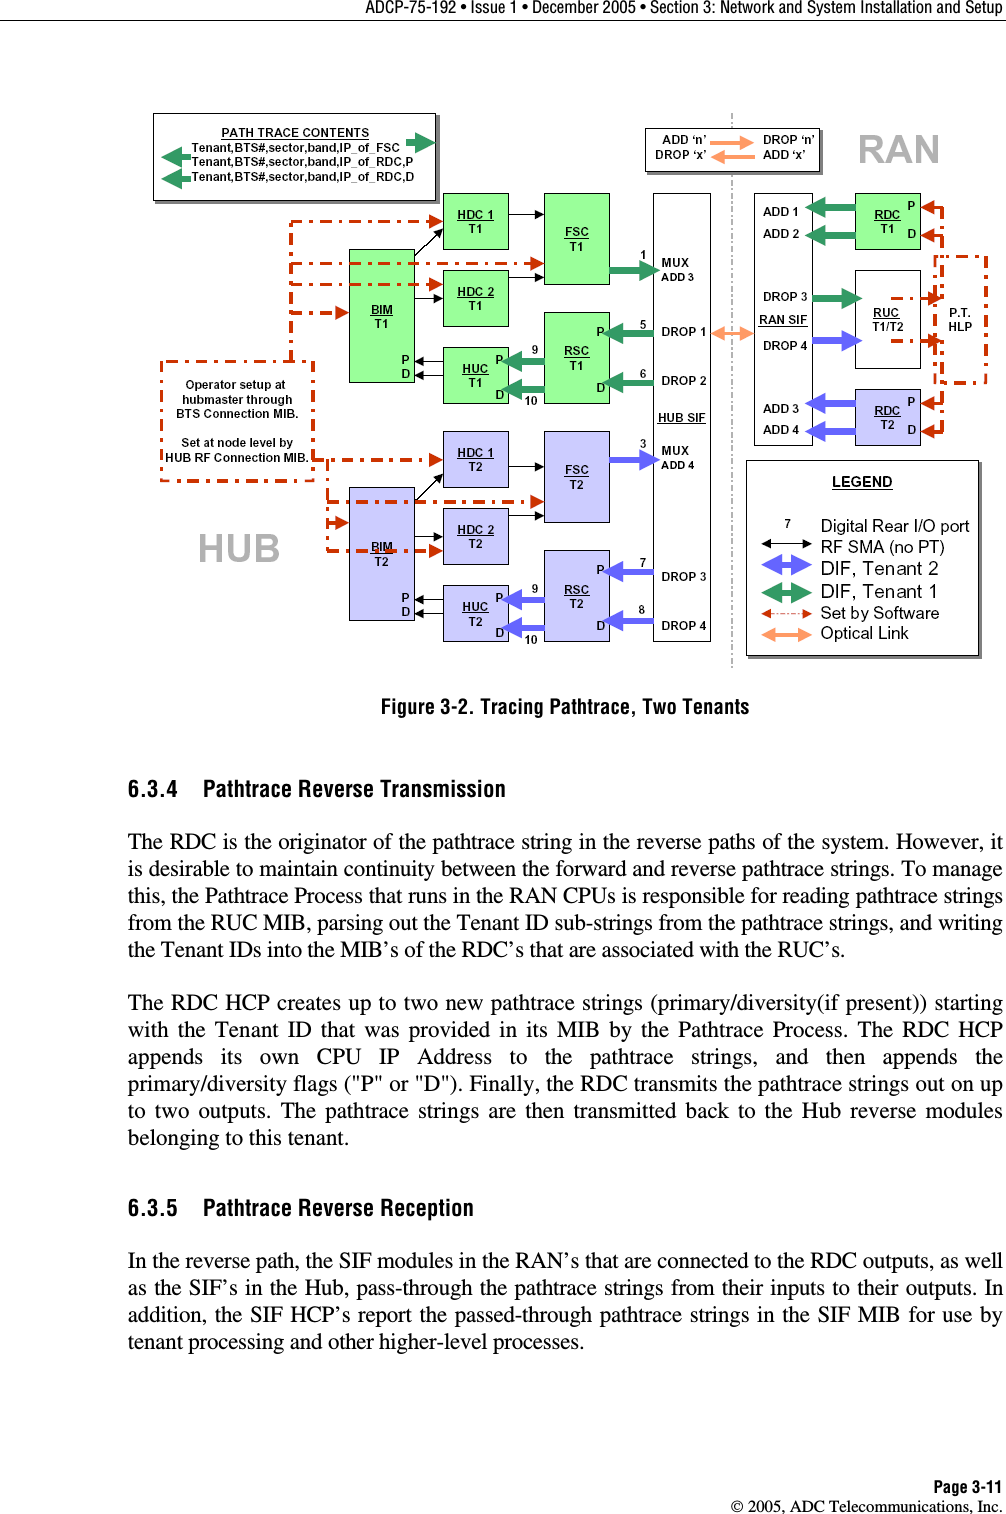 ADCP-75-192 • Issue 1 • December 2005 • Section 3: Network and System Installation and Setup Page 3-11  2005, ADC Telecommunications, Inc.  Figure 3-2. Tracing Pathtrace, Two Tenants 6.3.4  Pathtrace Reverse Transmission The RDC is the originator of the pathtrace string in the reverse paths of the system. However, it is desirable to maintain continuity between the forward and reverse pathtrace strings. To manage this, the Pathtrace Process that runs in the RAN CPUs is responsible for reading pathtrace strings from the RUC MIB, parsing out the Tenant ID sub-strings from the pathtrace strings, and writing the Tenant IDs into the MIB’s of the RDC’s that are associated with the RUC’s. The RDC HCP creates up to two new pathtrace strings (primary/diversity(if present)) starting with the Tenant ID that was provided in its MIB by the Pathtrace Process. The RDC HCP appends its own CPU IP Address to the pathtrace strings, and then appends the primary/diversity flags (&quot;P&quot; or &quot;D&quot;). Finally, the RDC transmits the pathtrace strings out on up to two outputs. The pathtrace strings are then transmitted back to the Hub reverse modules belonging to this tenant. 6.3.5  Pathtrace Reverse Reception In the reverse path, the SIF modules in the RAN’s that are connected to the RDC outputs, as well as the SIF’s in the Hub, pass-through the pathtrace strings from their inputs to their outputs. In addition, the SIF HCP’s report the passed-through pathtrace strings in the SIF MIB for use by tenant processing and other higher-level processes.  